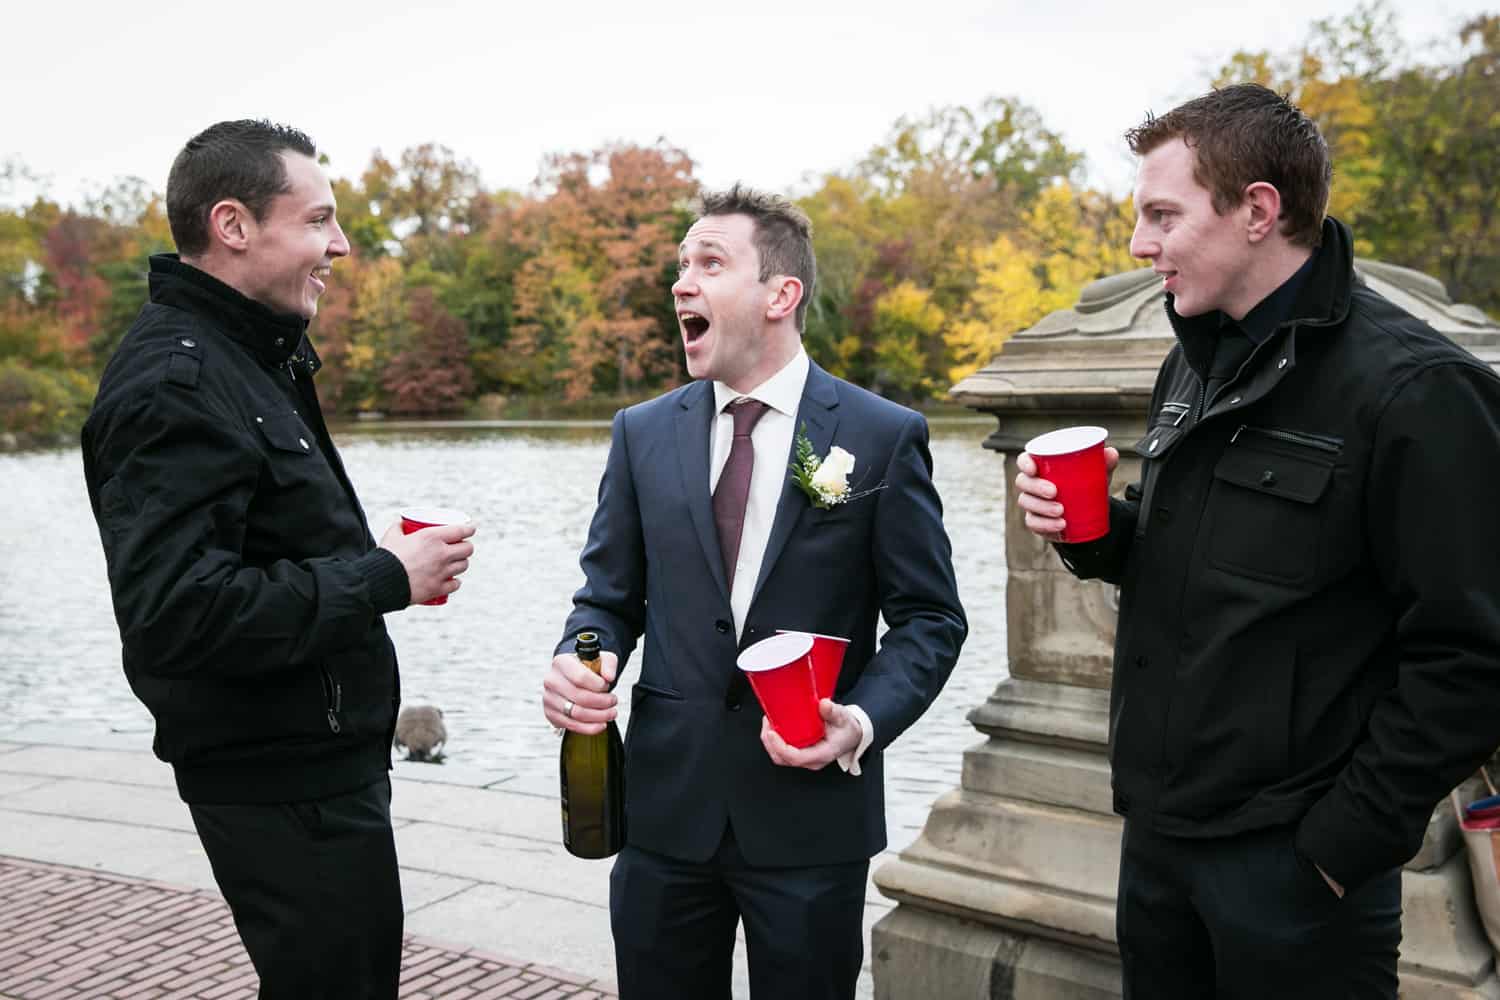 Groom celebrating with two male guests at a Bethesda Fountain wedding in Central Park